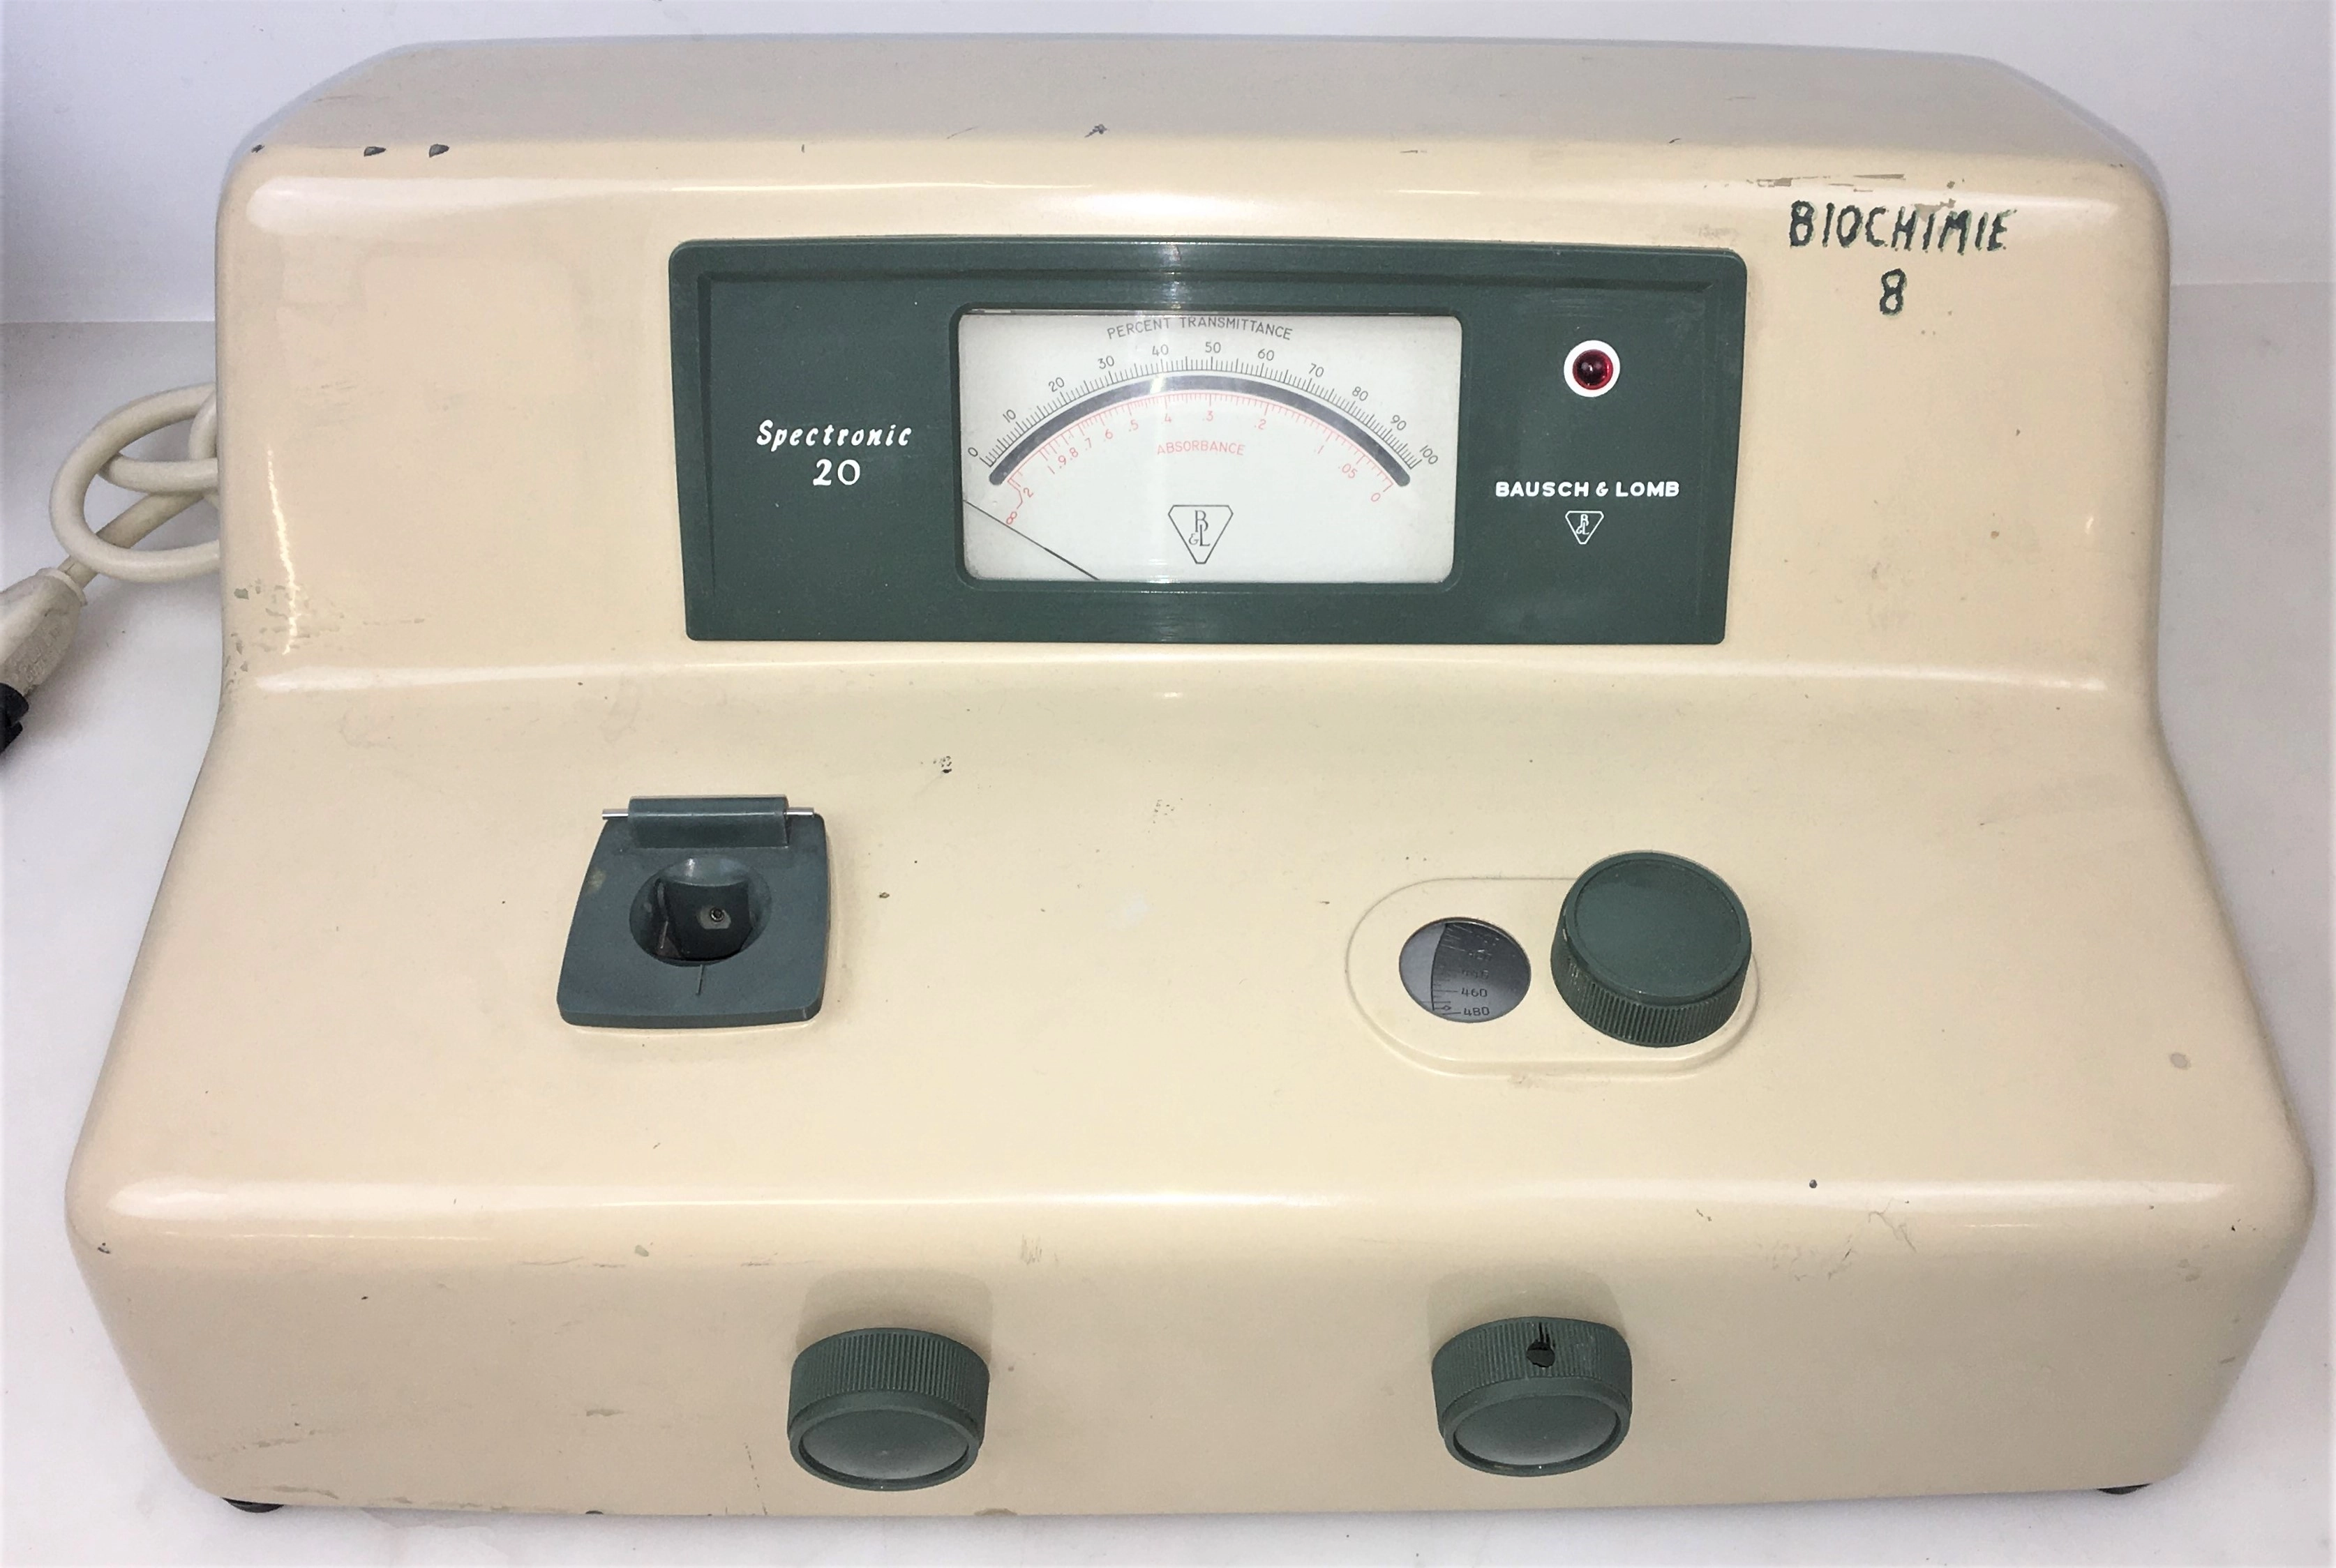 Bausch &amp; Lomb Spectronic 20 (33.29.61.64) Visible Spectrophotometer - 340 to 950nm